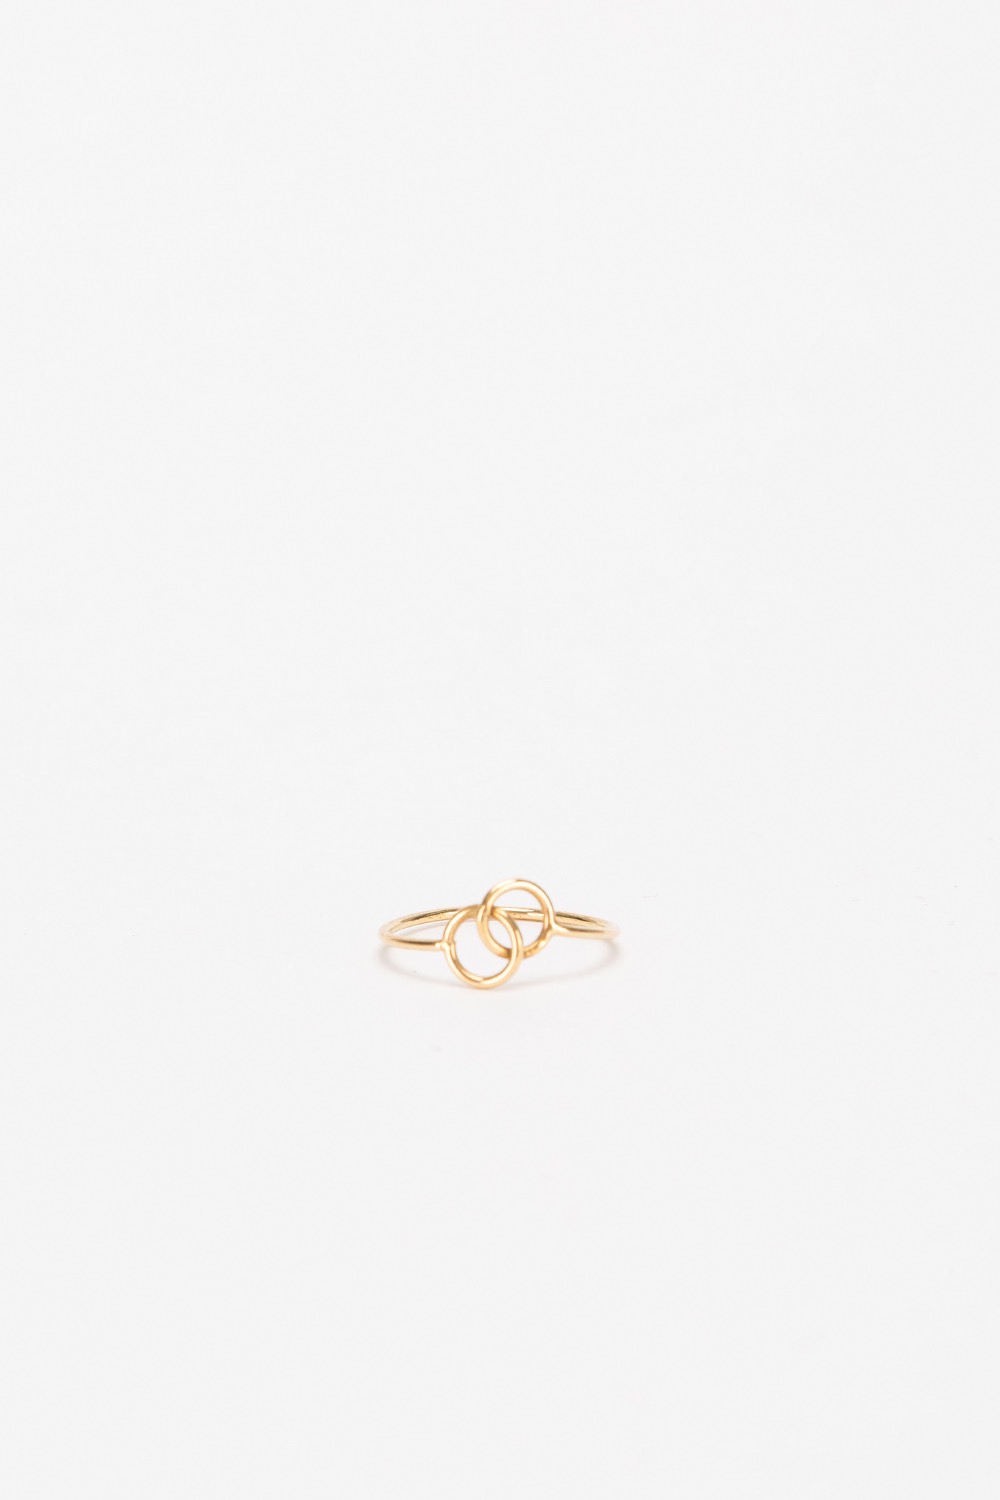 UNION GOLD RING(R049-OA)